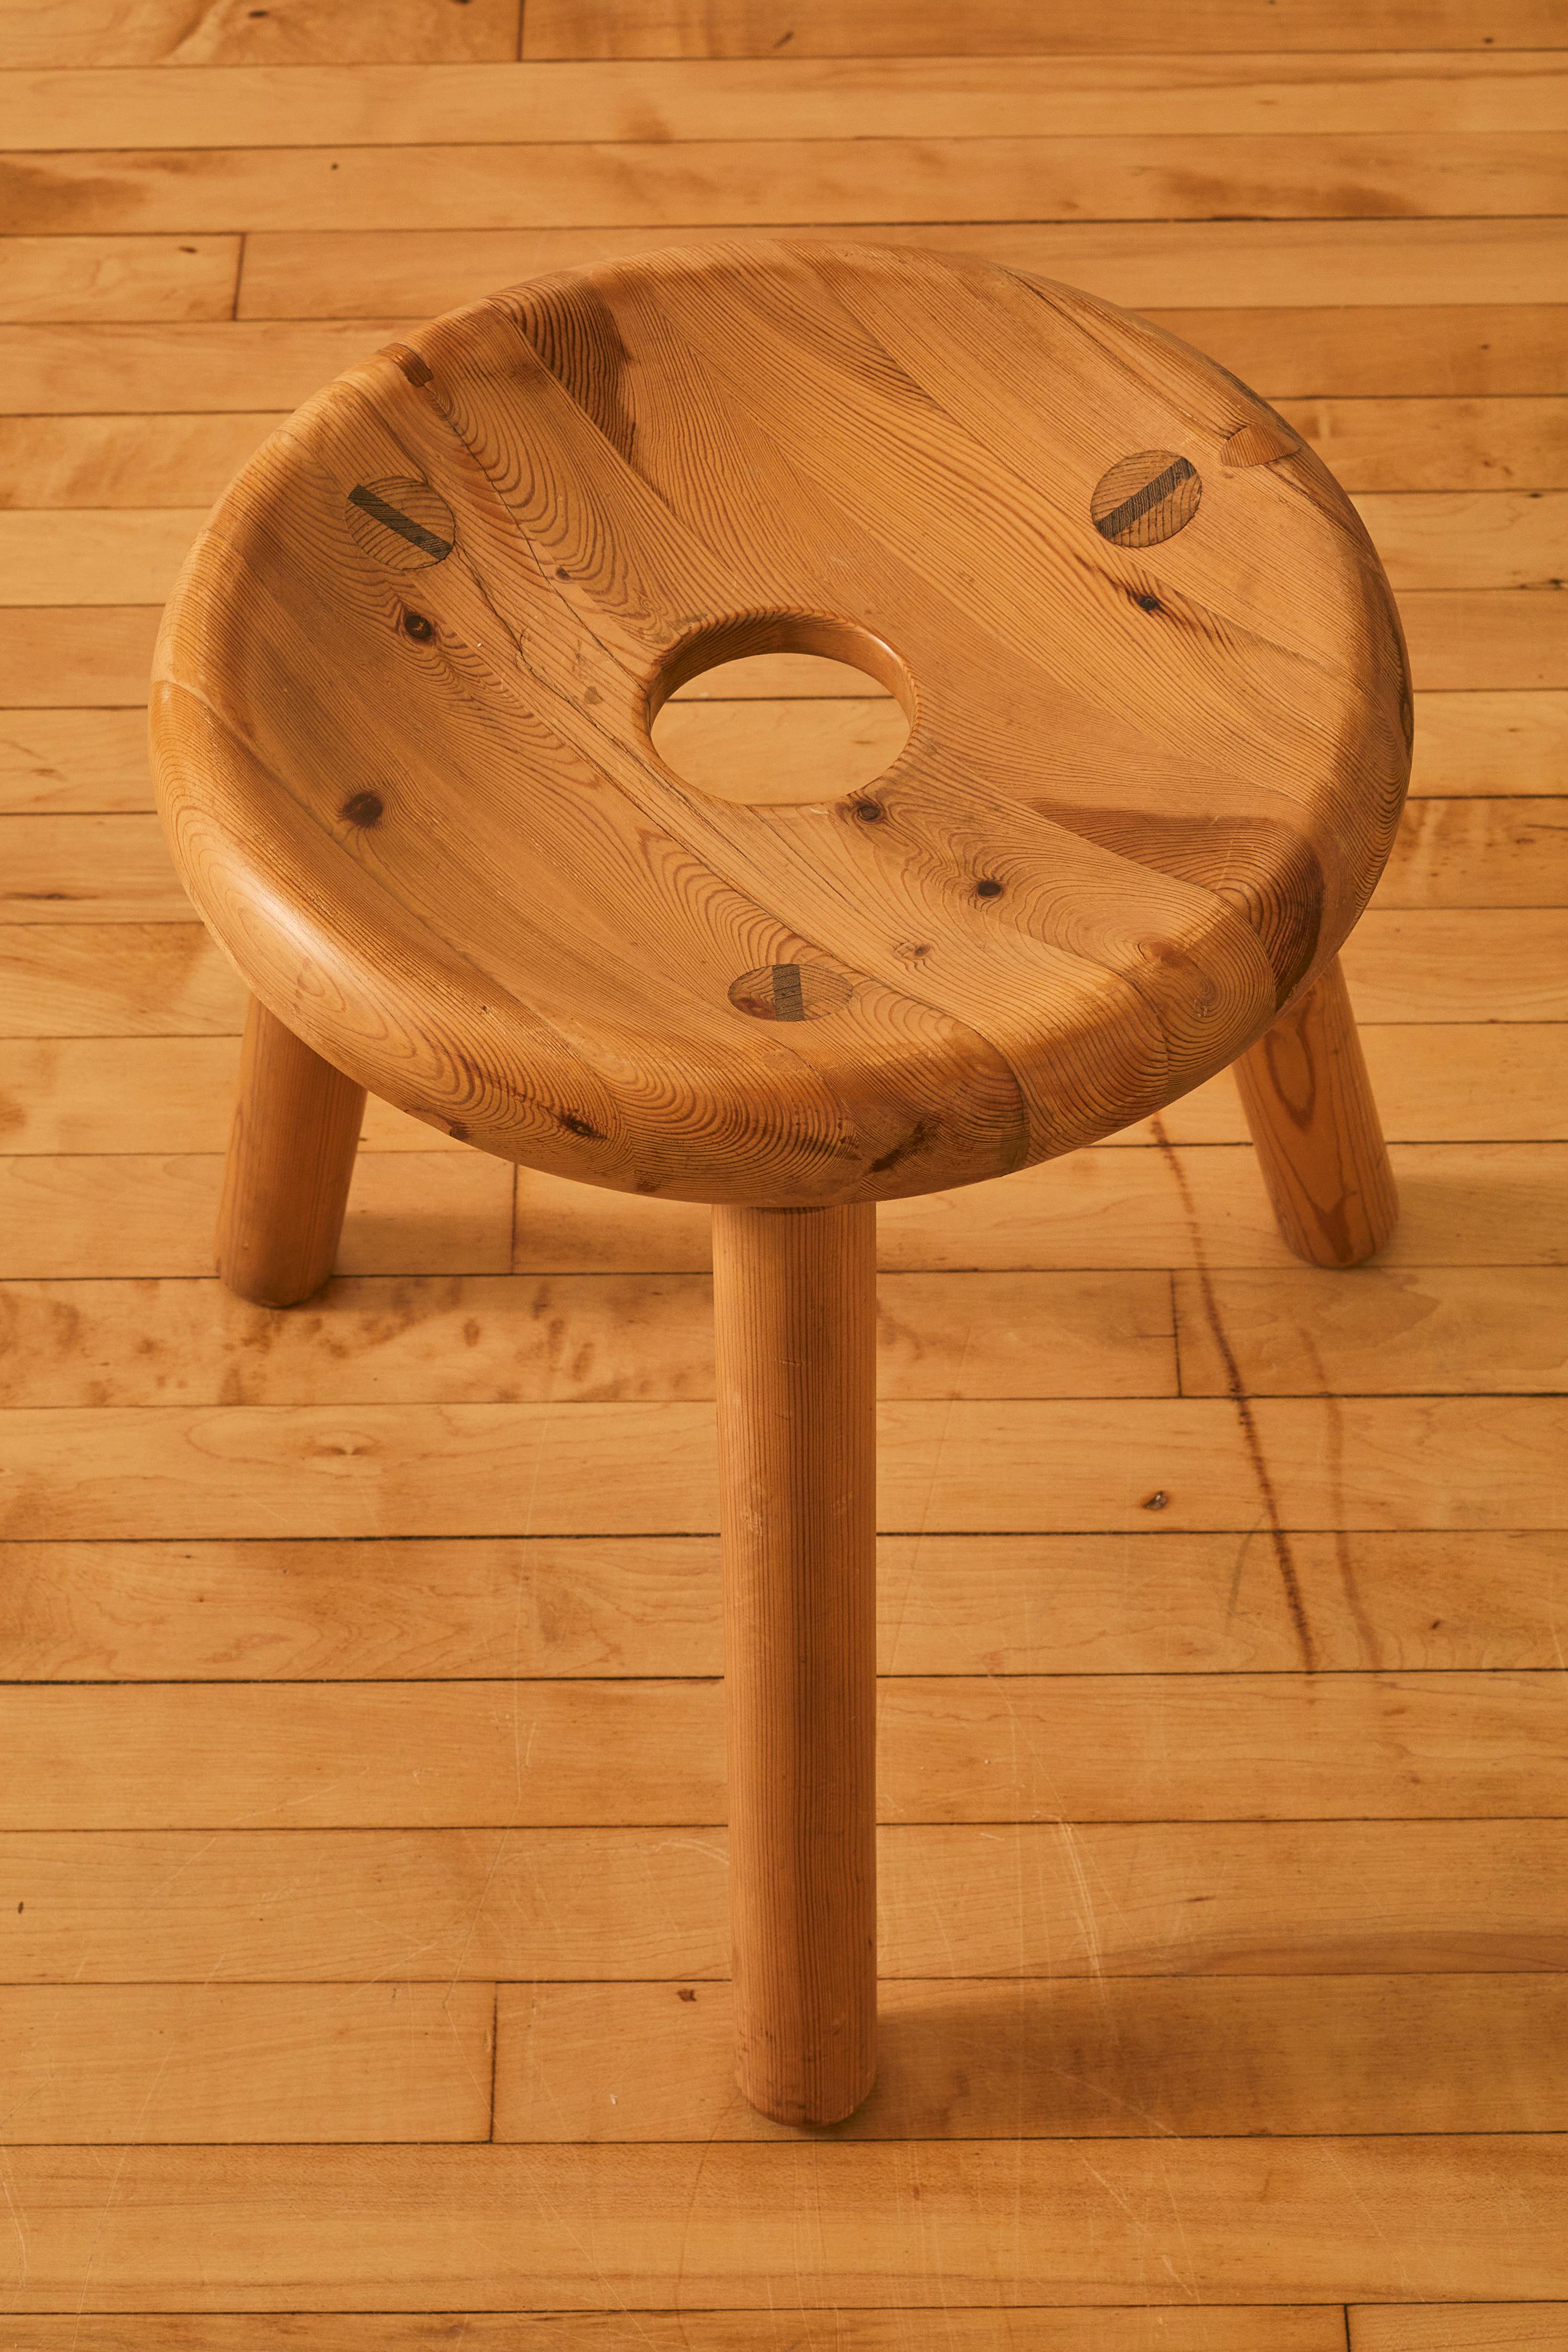 wooden stool with hole in middle